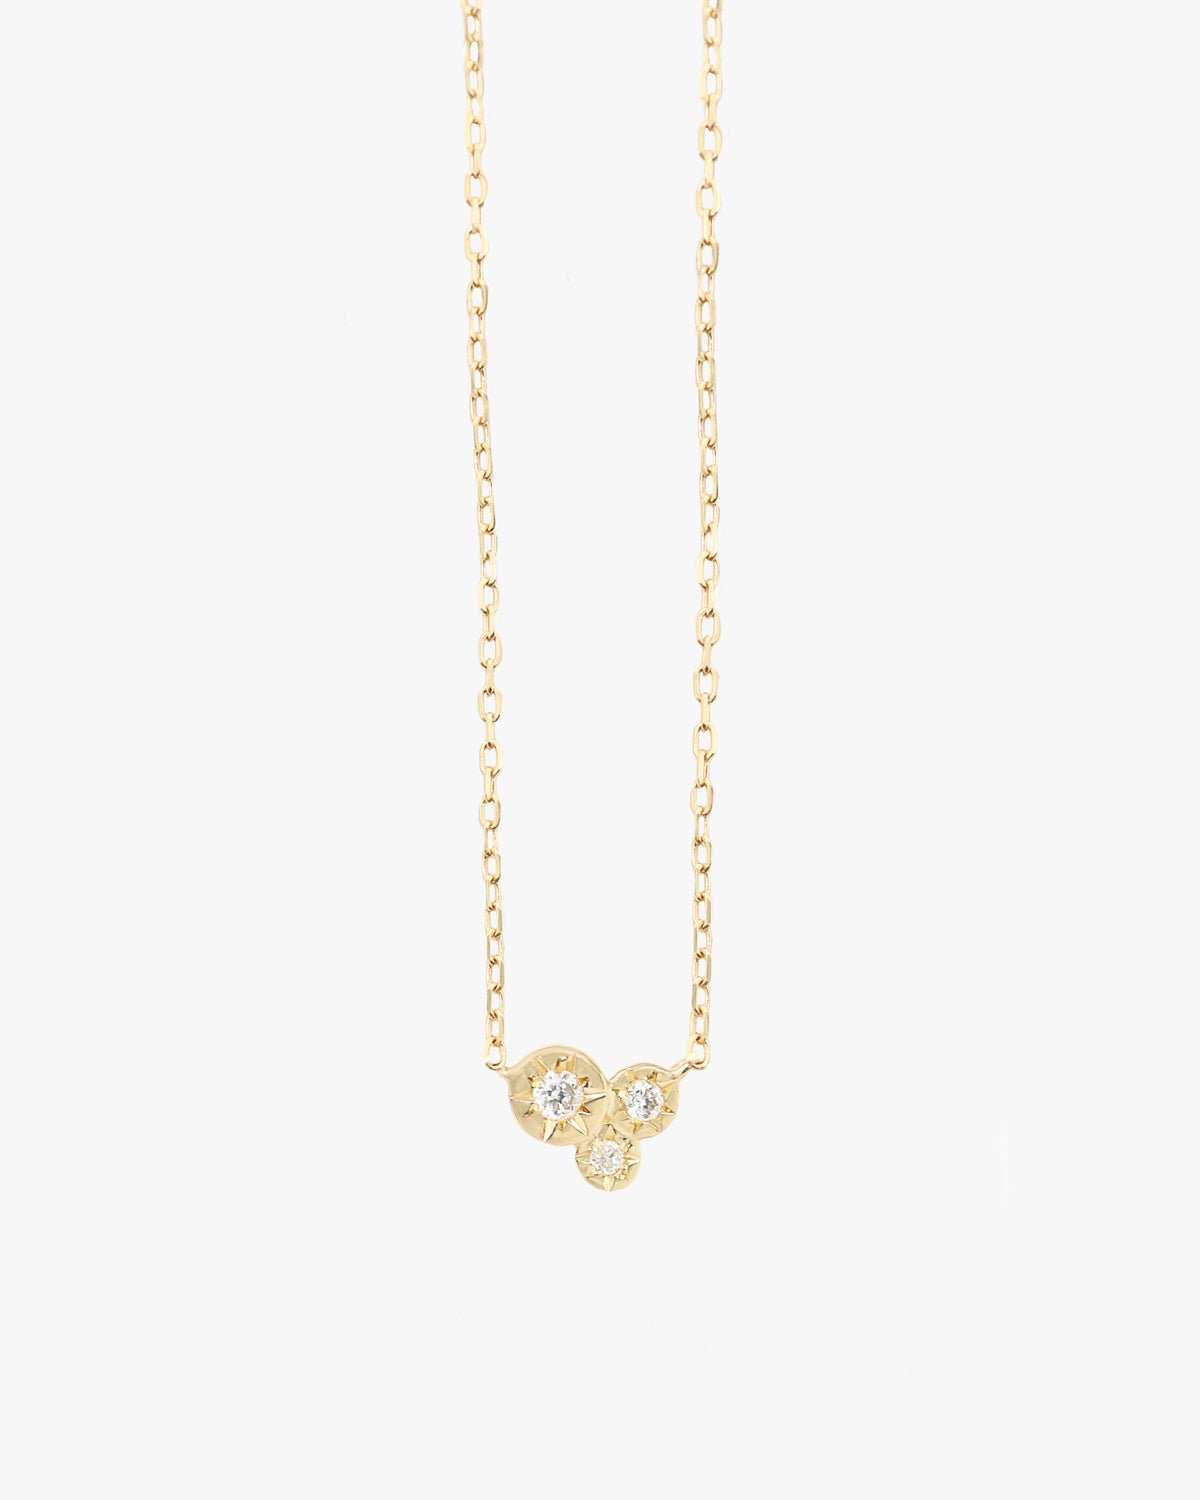 CAMBRIA CLUSTER DIAMOND NECKLACE - Shop Cupcakes and Cashmere